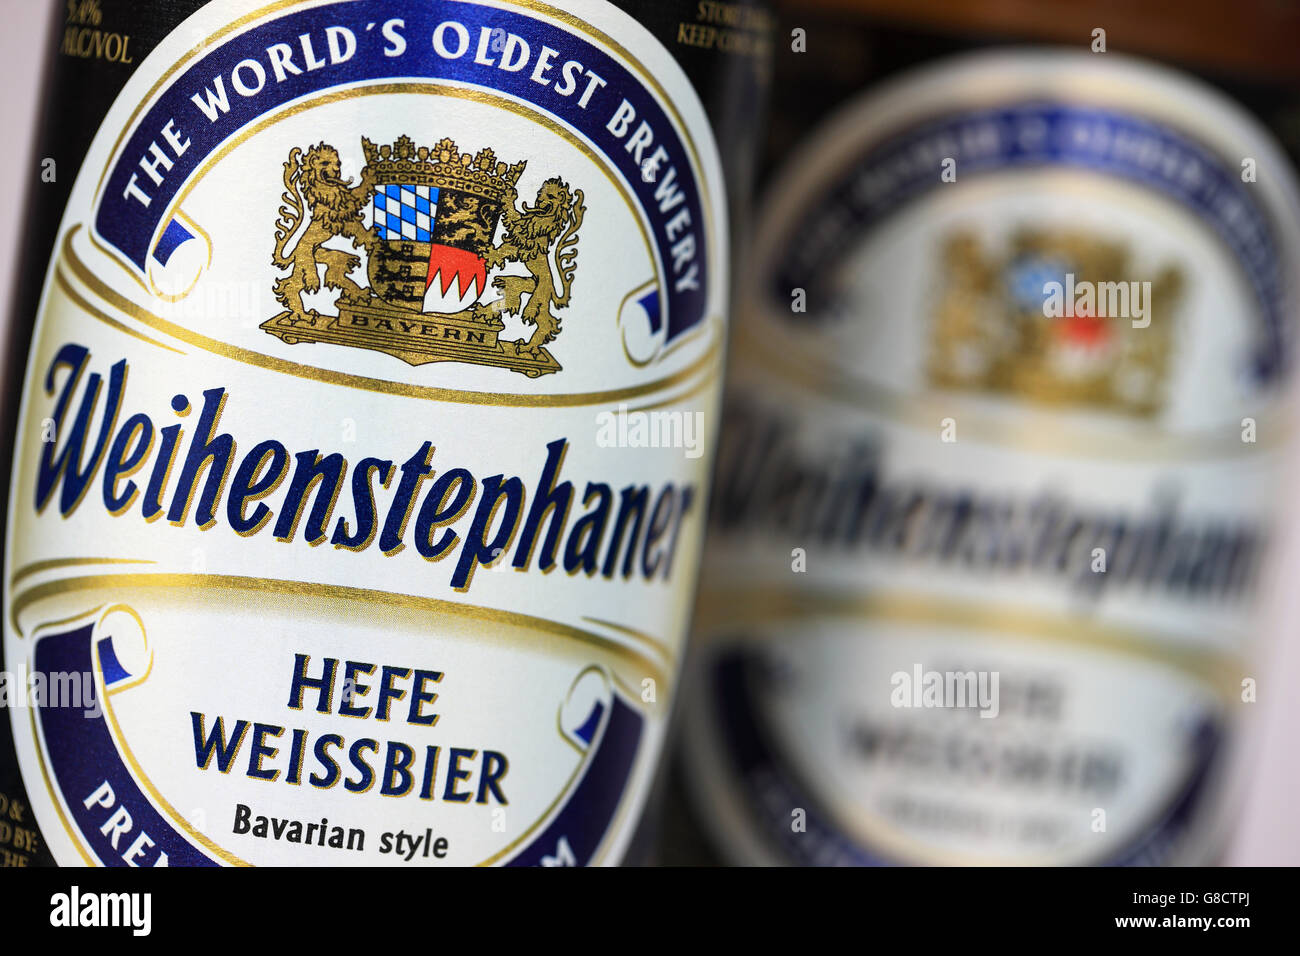 Bavarian beer Weihenstephaner from the World's Oldest Brewery in Germany Stock Photo